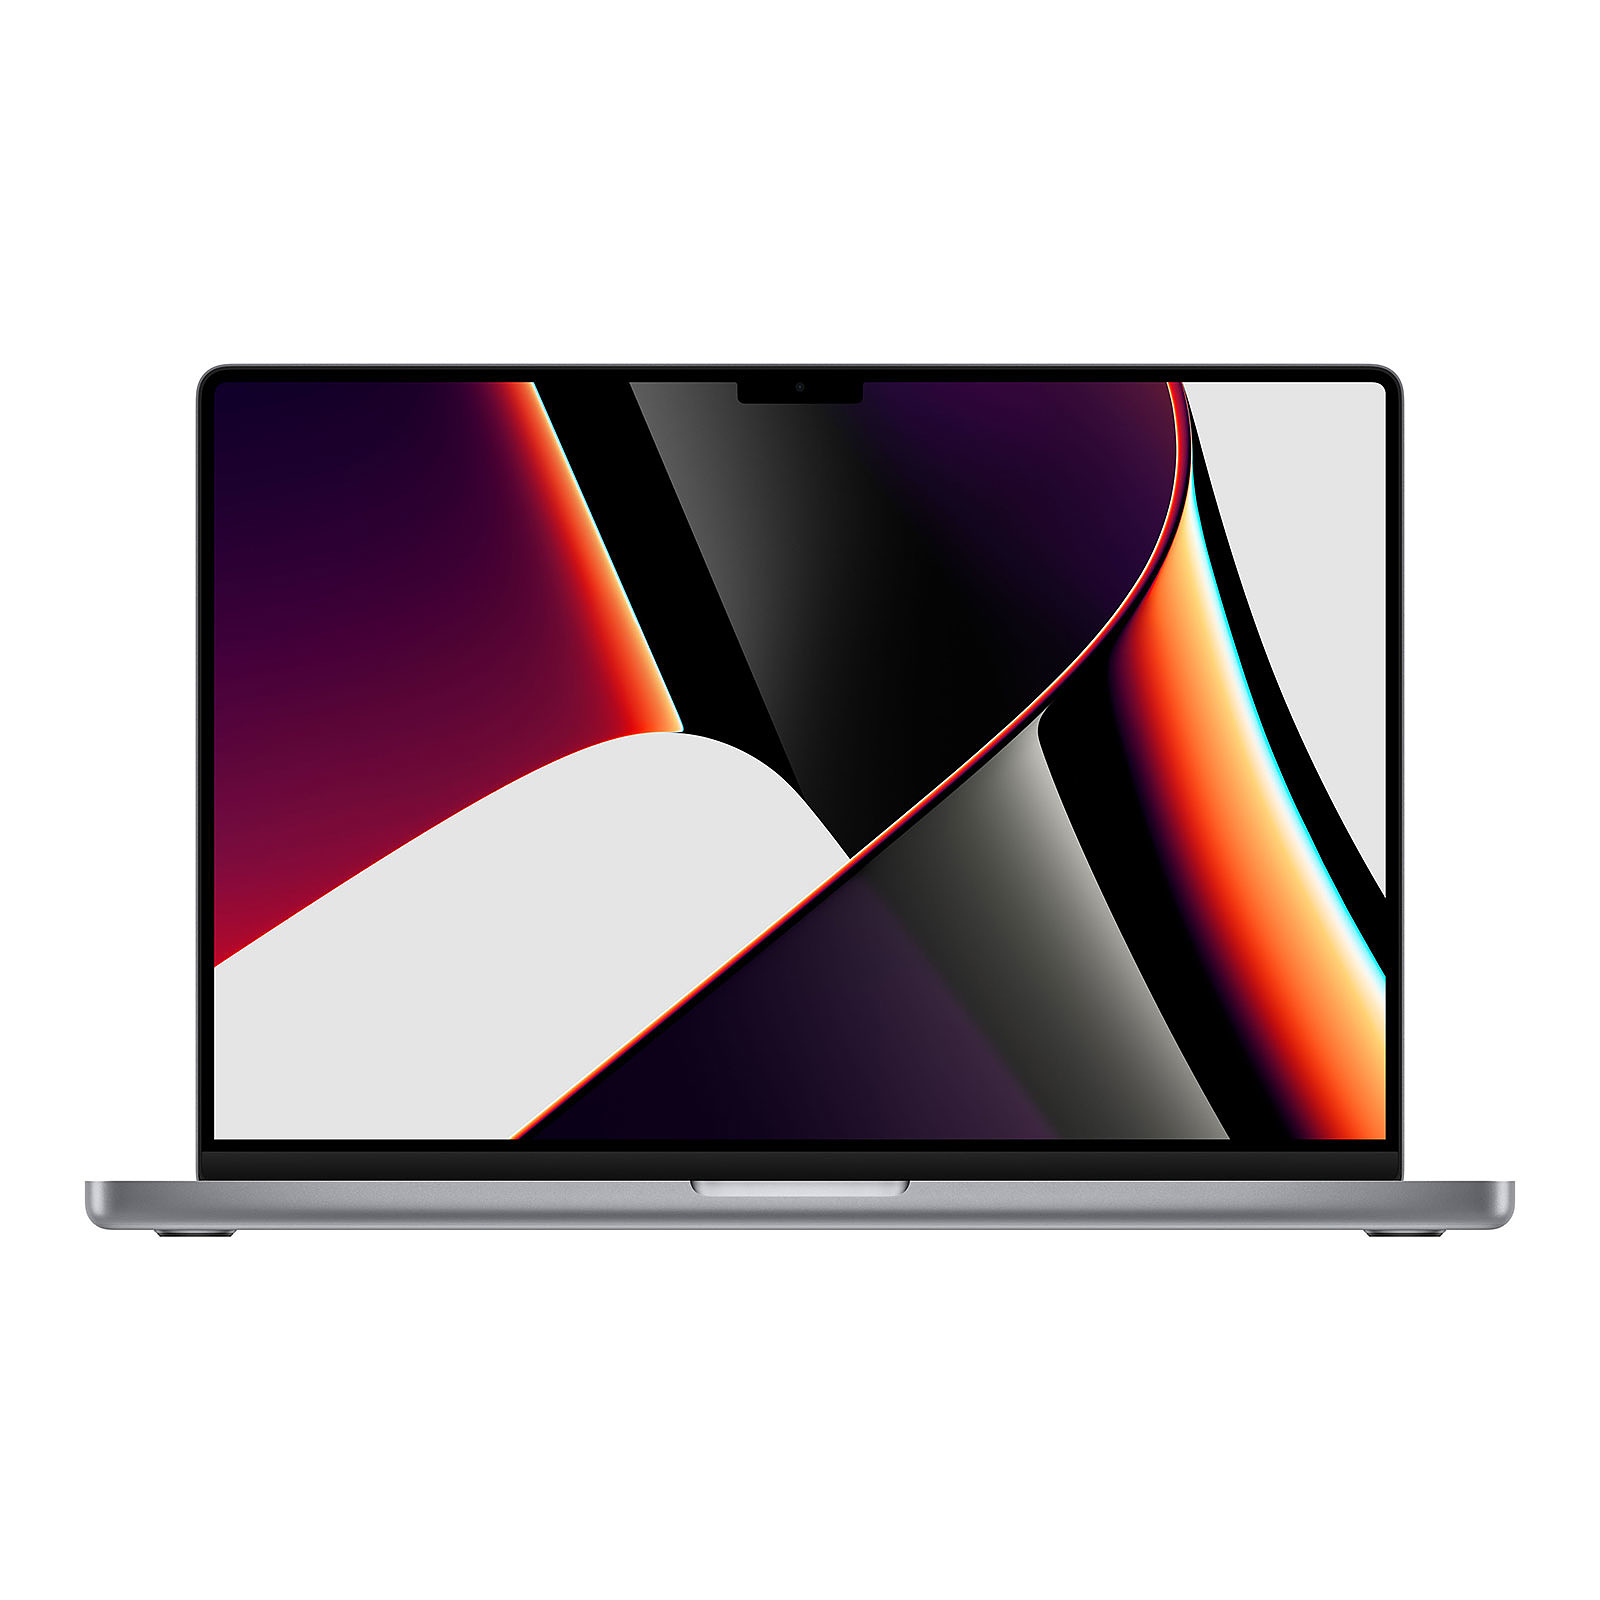 Apple MacBook Pro M1 Pro (2021) 16" Gris sideral 64Go/2To (MK193FN/A-M1-MAX-64GB-2TB) - MacBook Apple